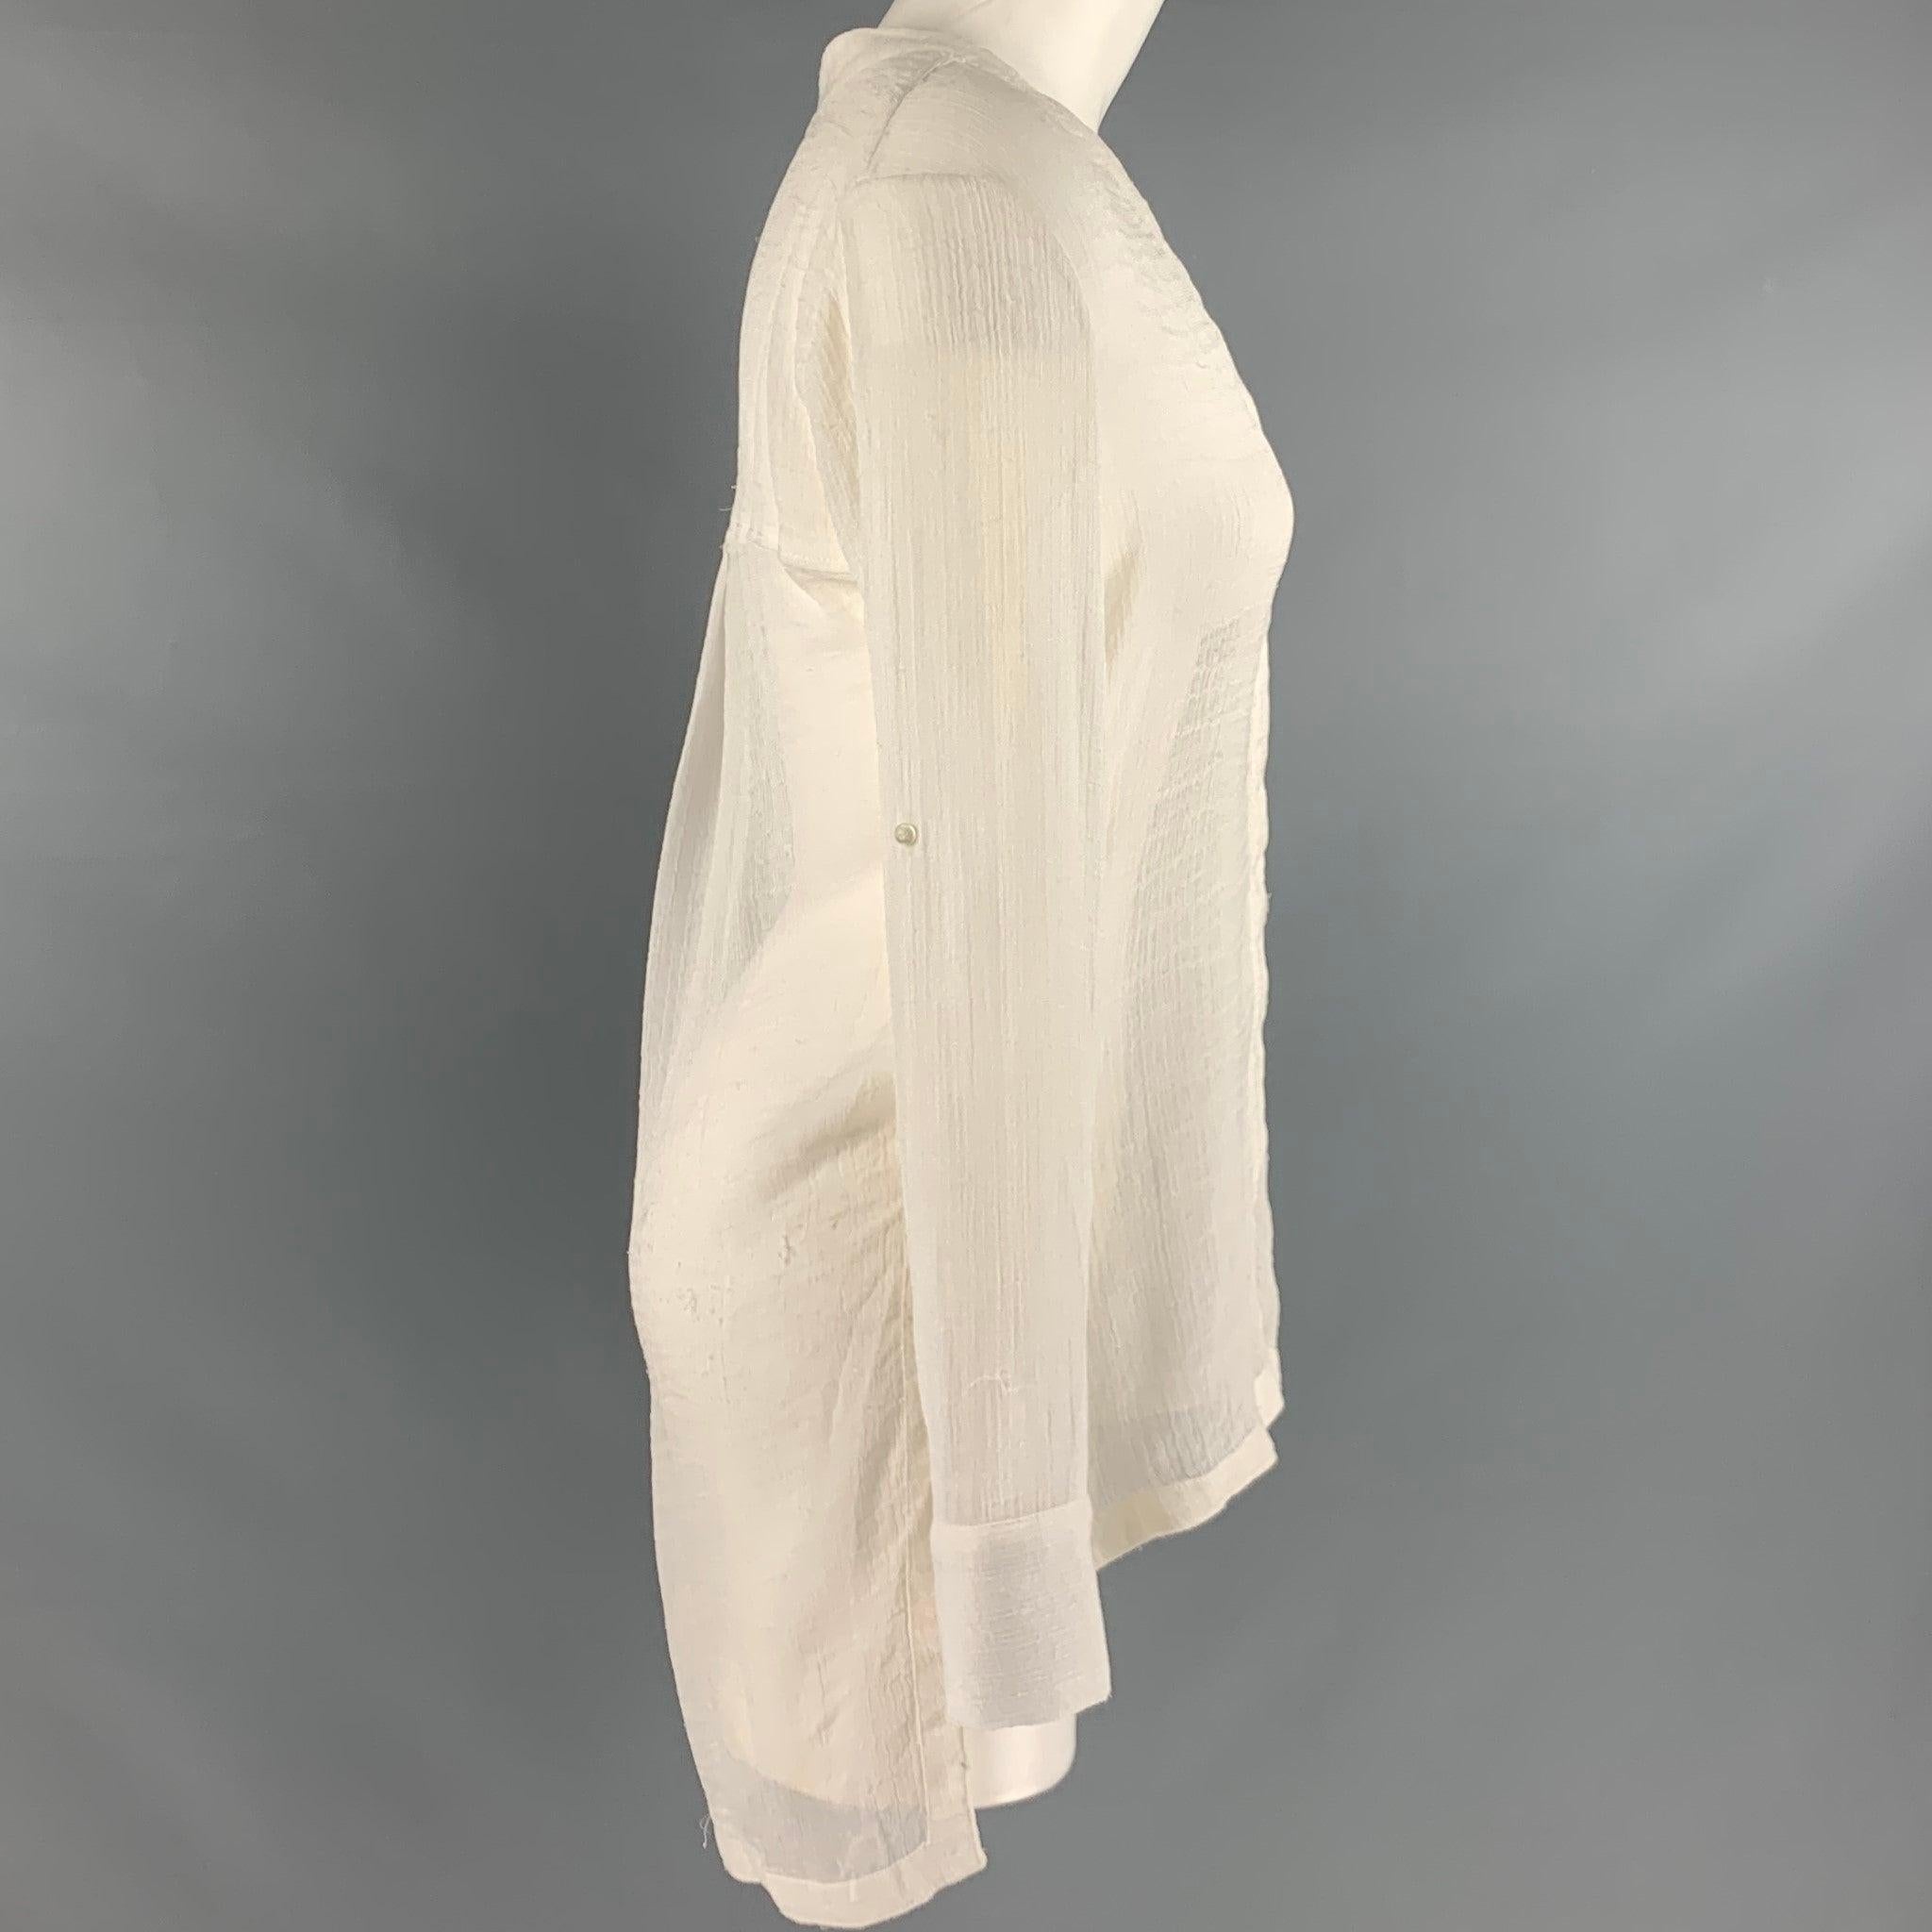 HELMUT LANG casual top
in a white triacetateblend fabric featuring a sheer see through hi-low style, long sleeves which can be rolled up, a V neck, and a hidden button closure. Made in USA.Very Good Pre-Owned Condition. Minor mark on front. As-is.